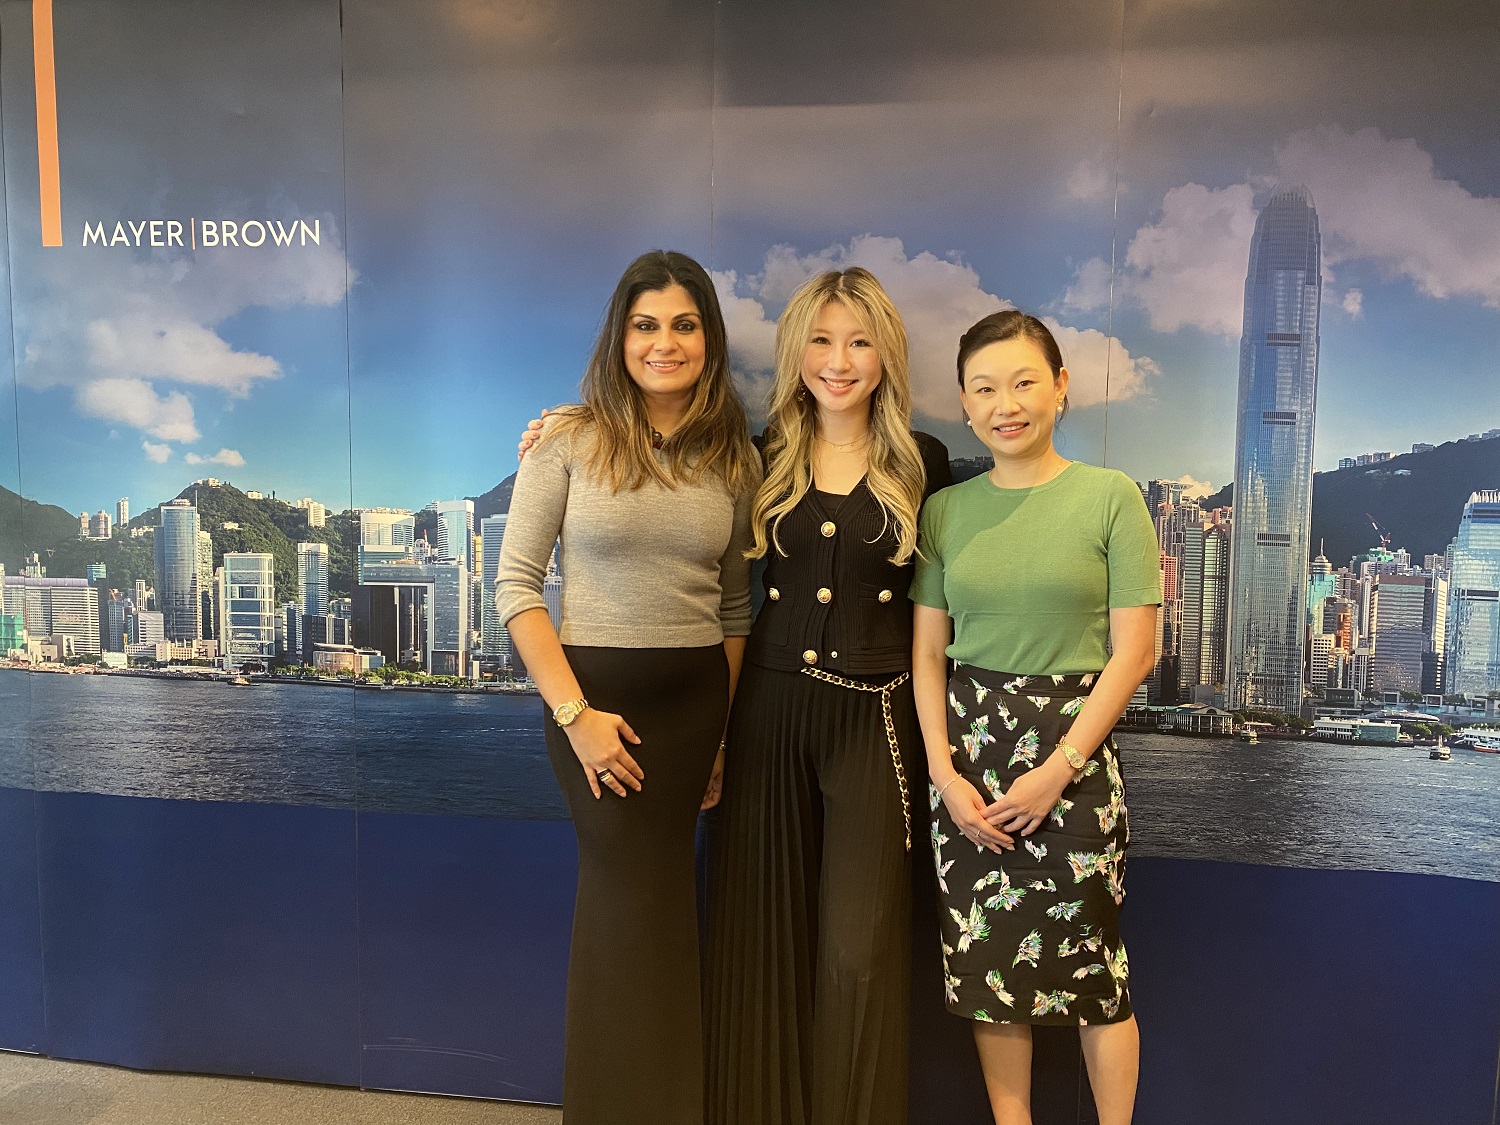 Amita Haylock, partner of Mayer Brown's IP & TMT group and Co-Chair of the Asia Women's Network, Alison Tsai, Chairlady of Women In Law Hong Kong and Helen Wang, counsel in the Corporate & Securities practice in Mayer Brown's Hong Kong office and Co-Chair of the Asia Women's Network (from left to right)